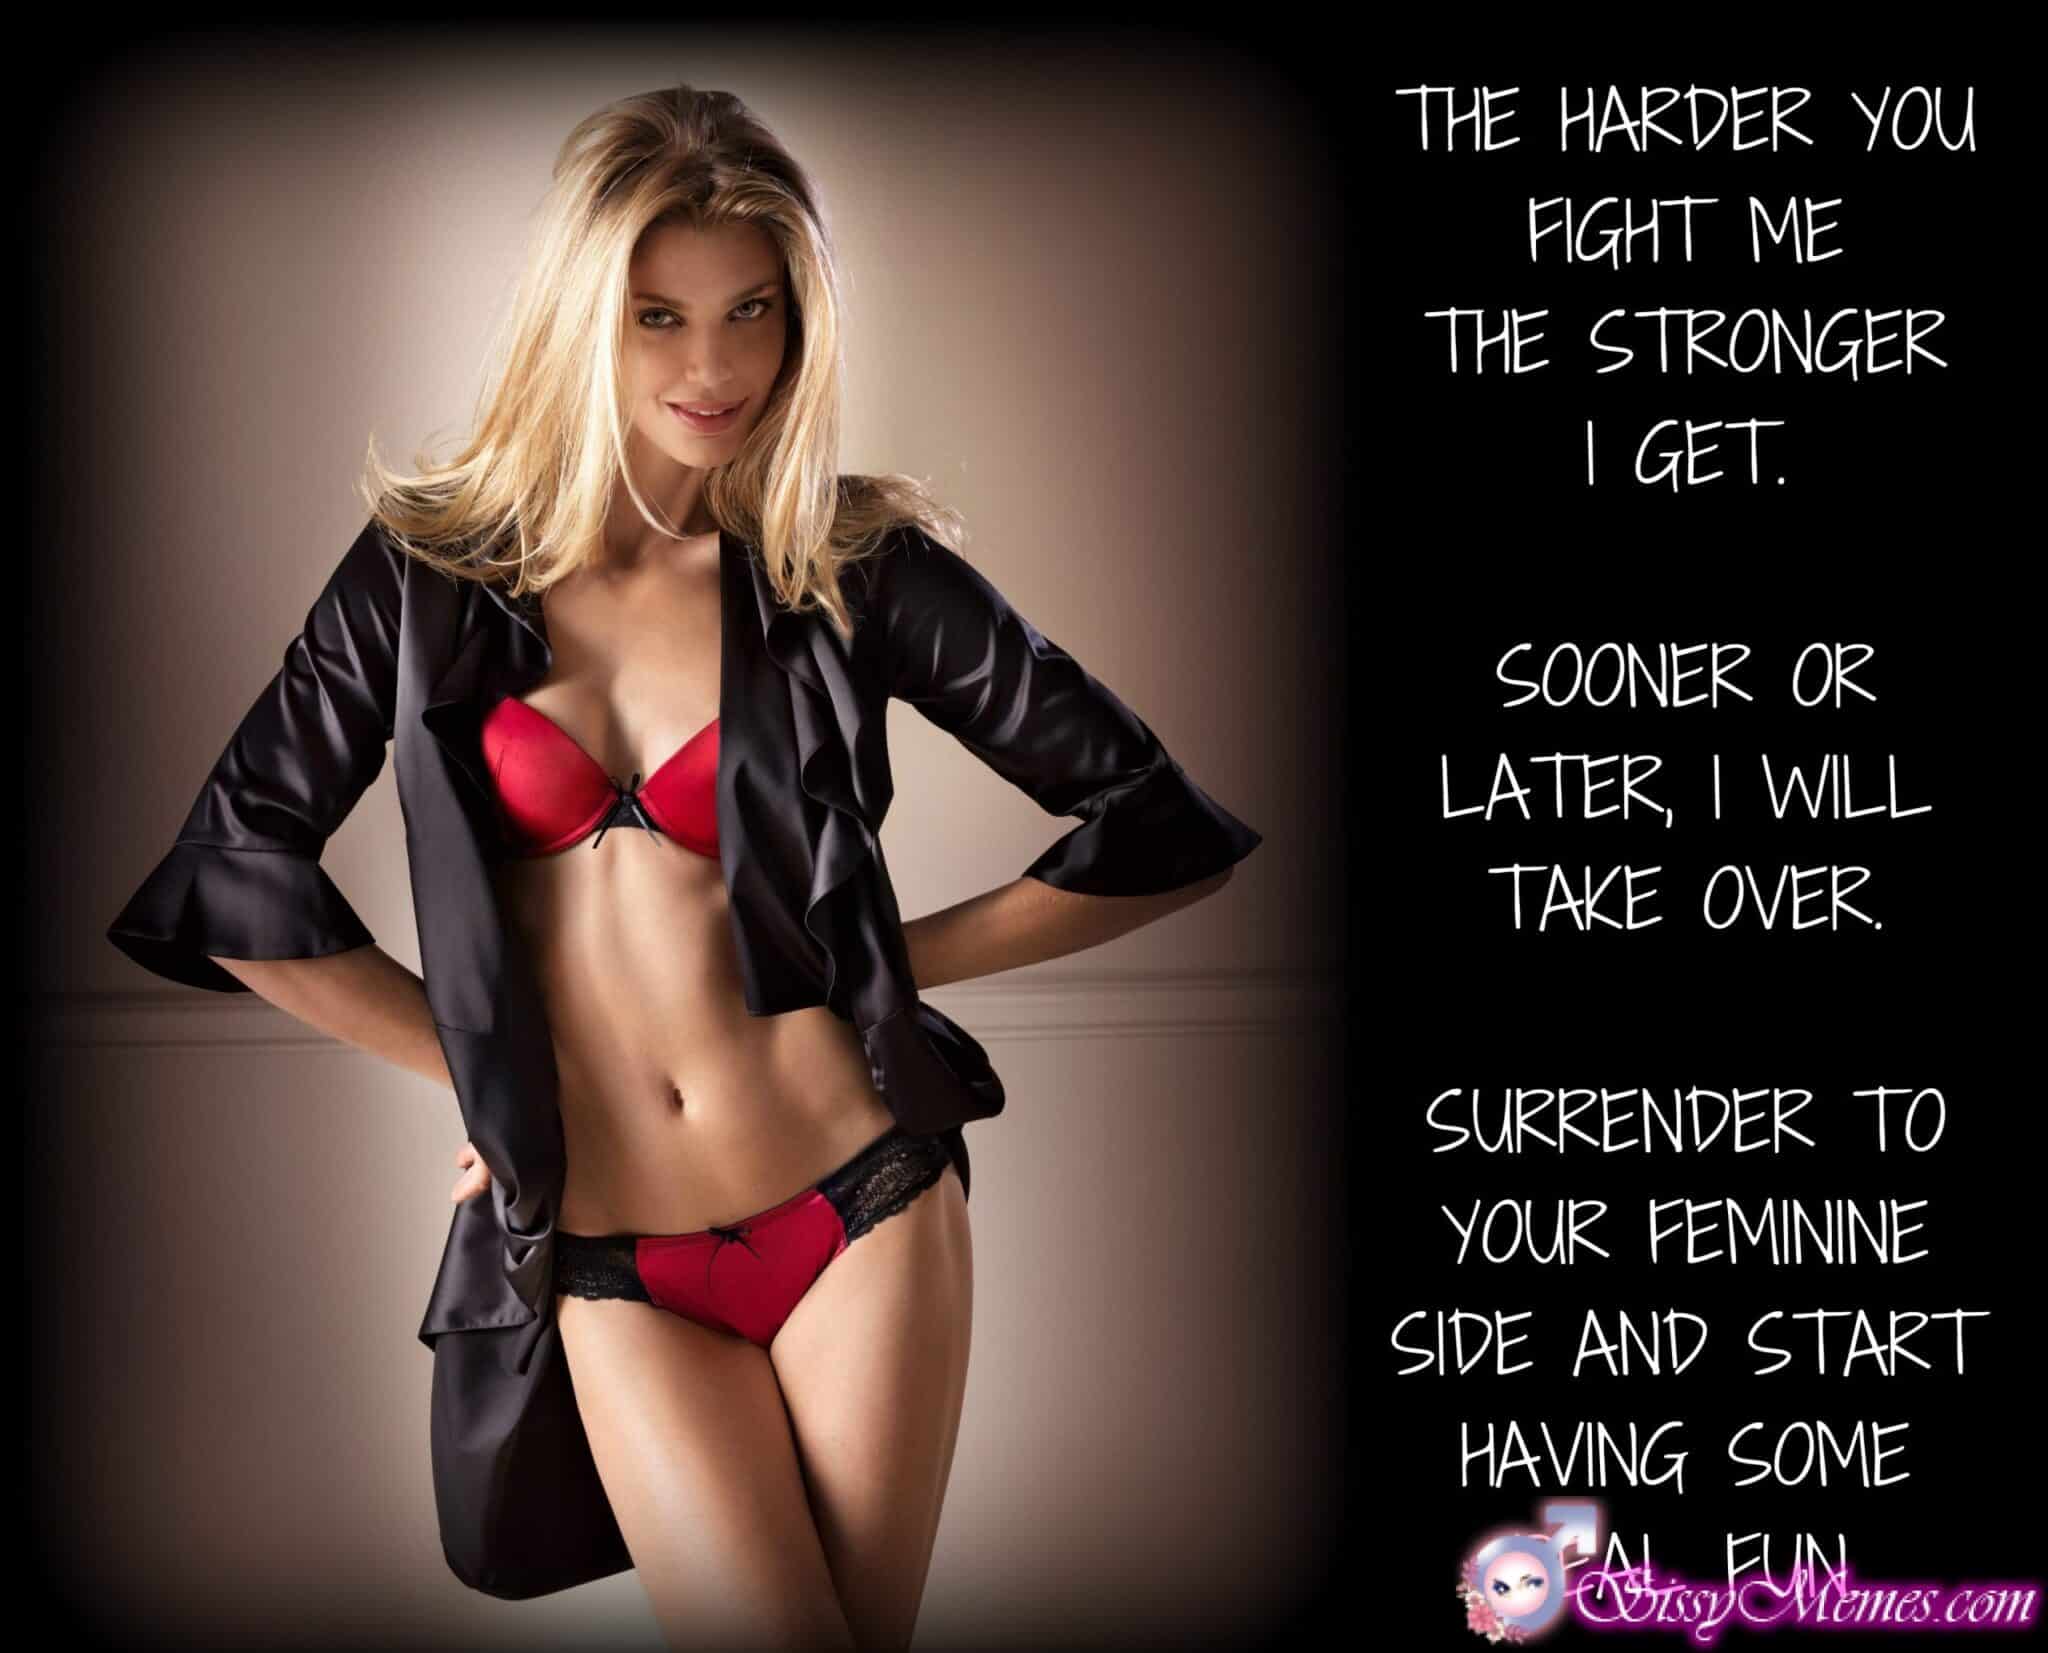 Trap Teen Feminization sissy caption: THE HARDER YOU FIGHT ME THE STRONGER I GET. SOONER OR LATER, I WILL TAKE OVER. SURRENDER TO YOUR FEMININE SIDE AND START HAVING SOME REAL FUN. Attractive Slutboy in a Black Womens Robe